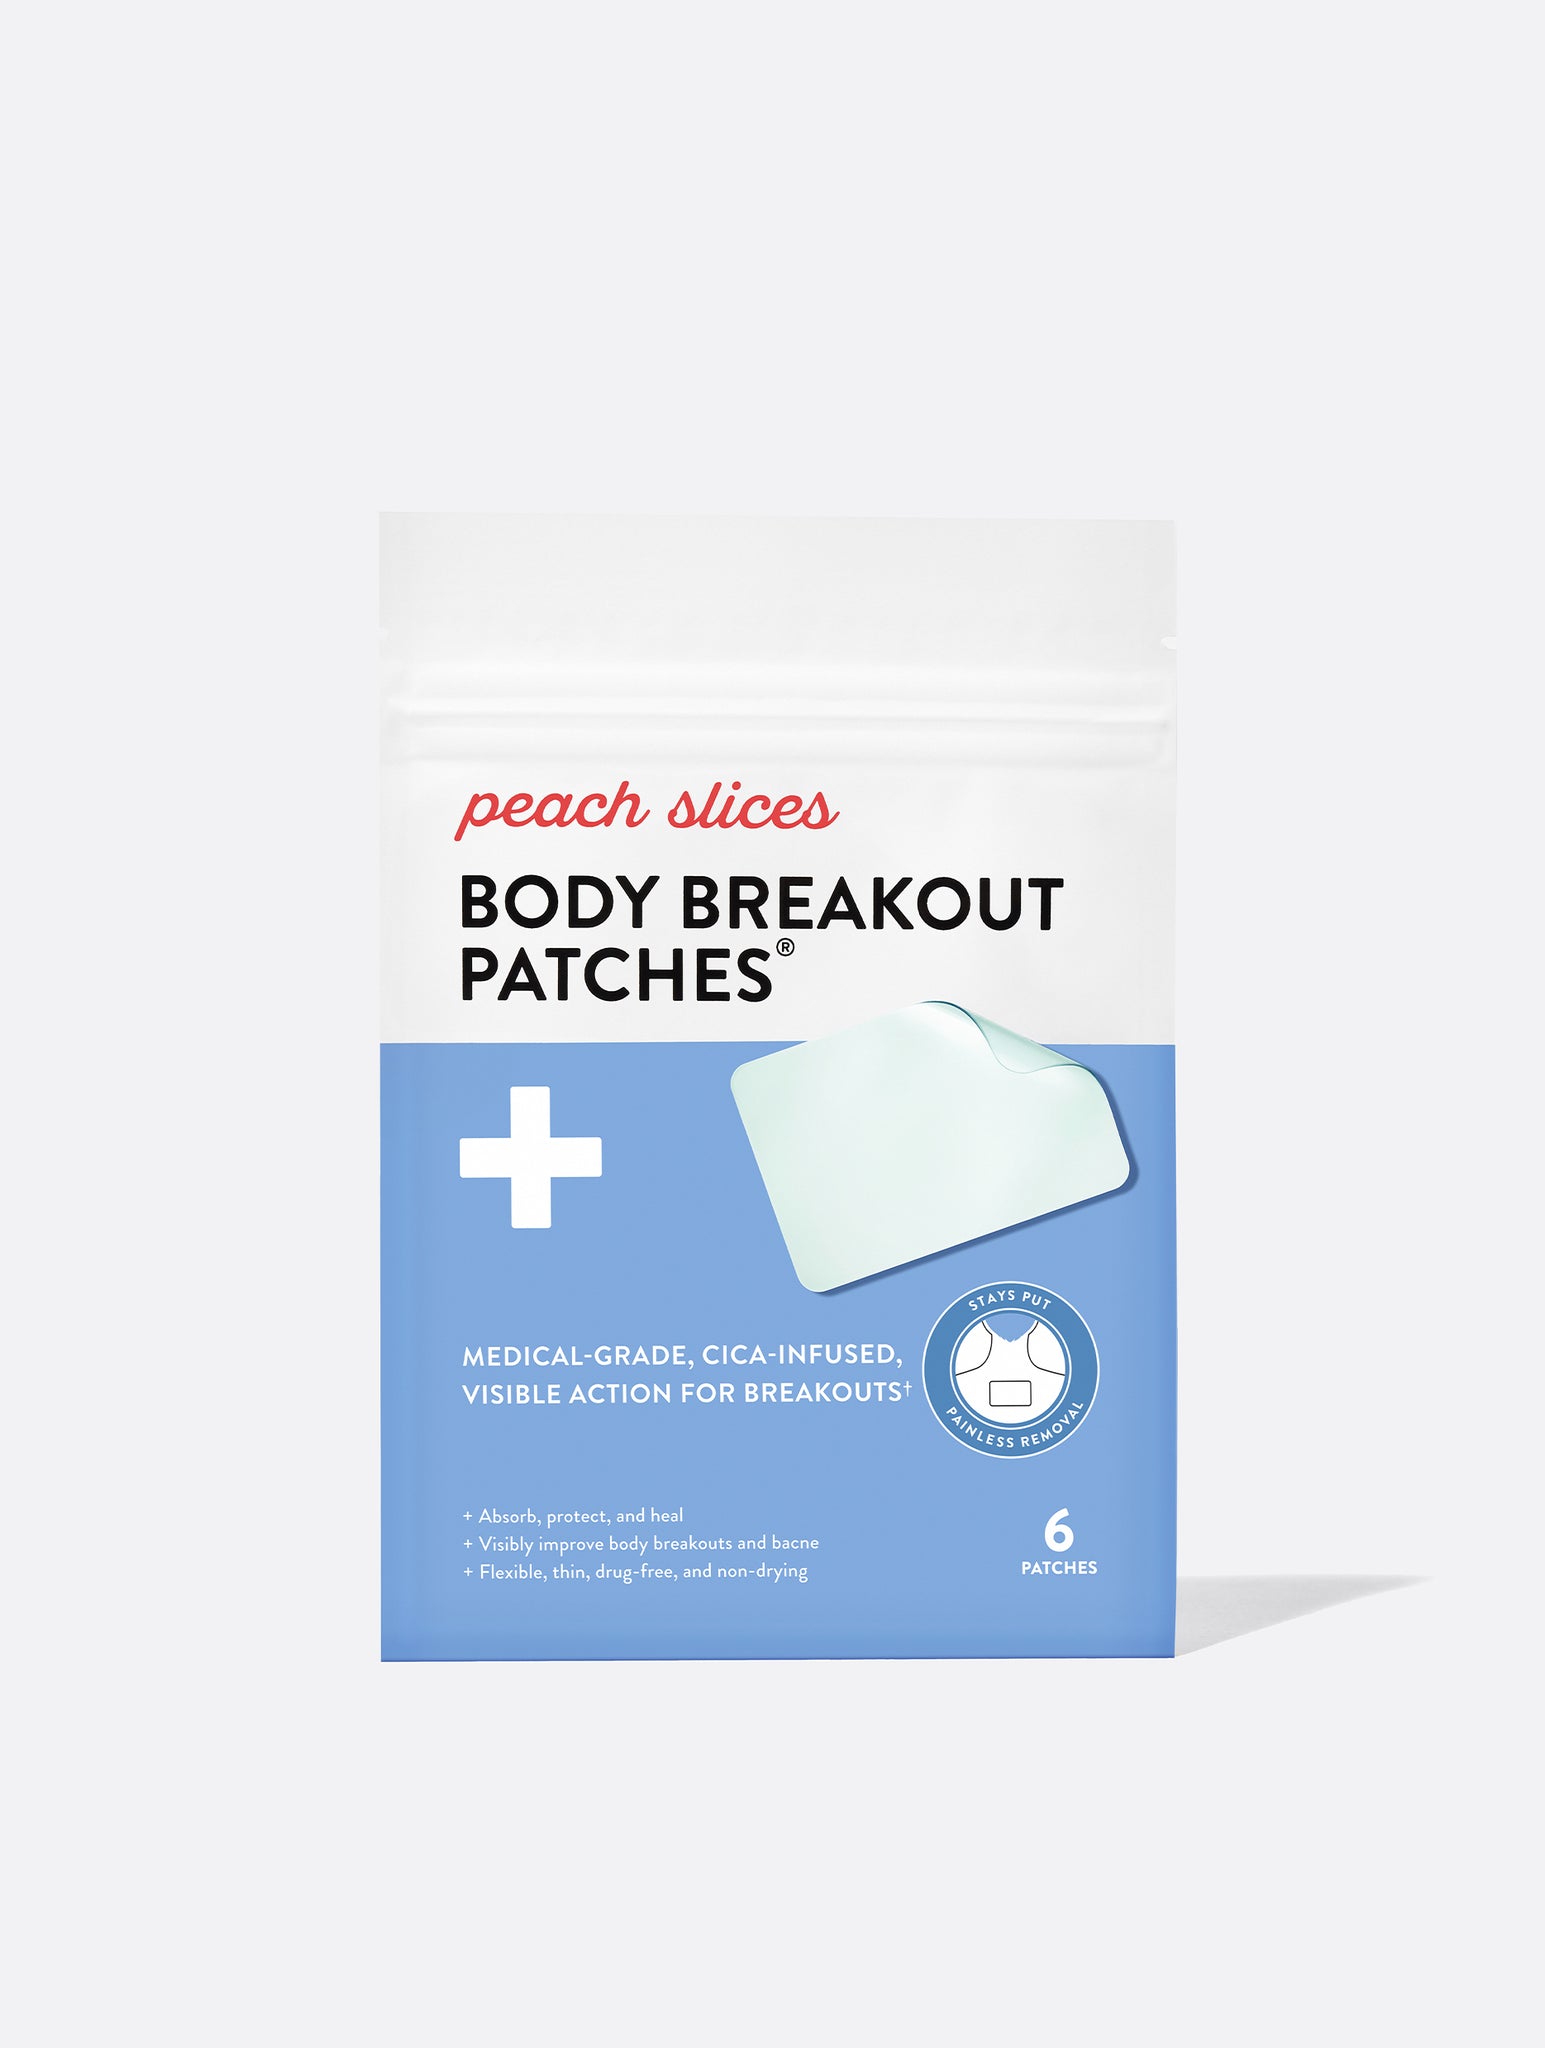 Body Breakout Patches